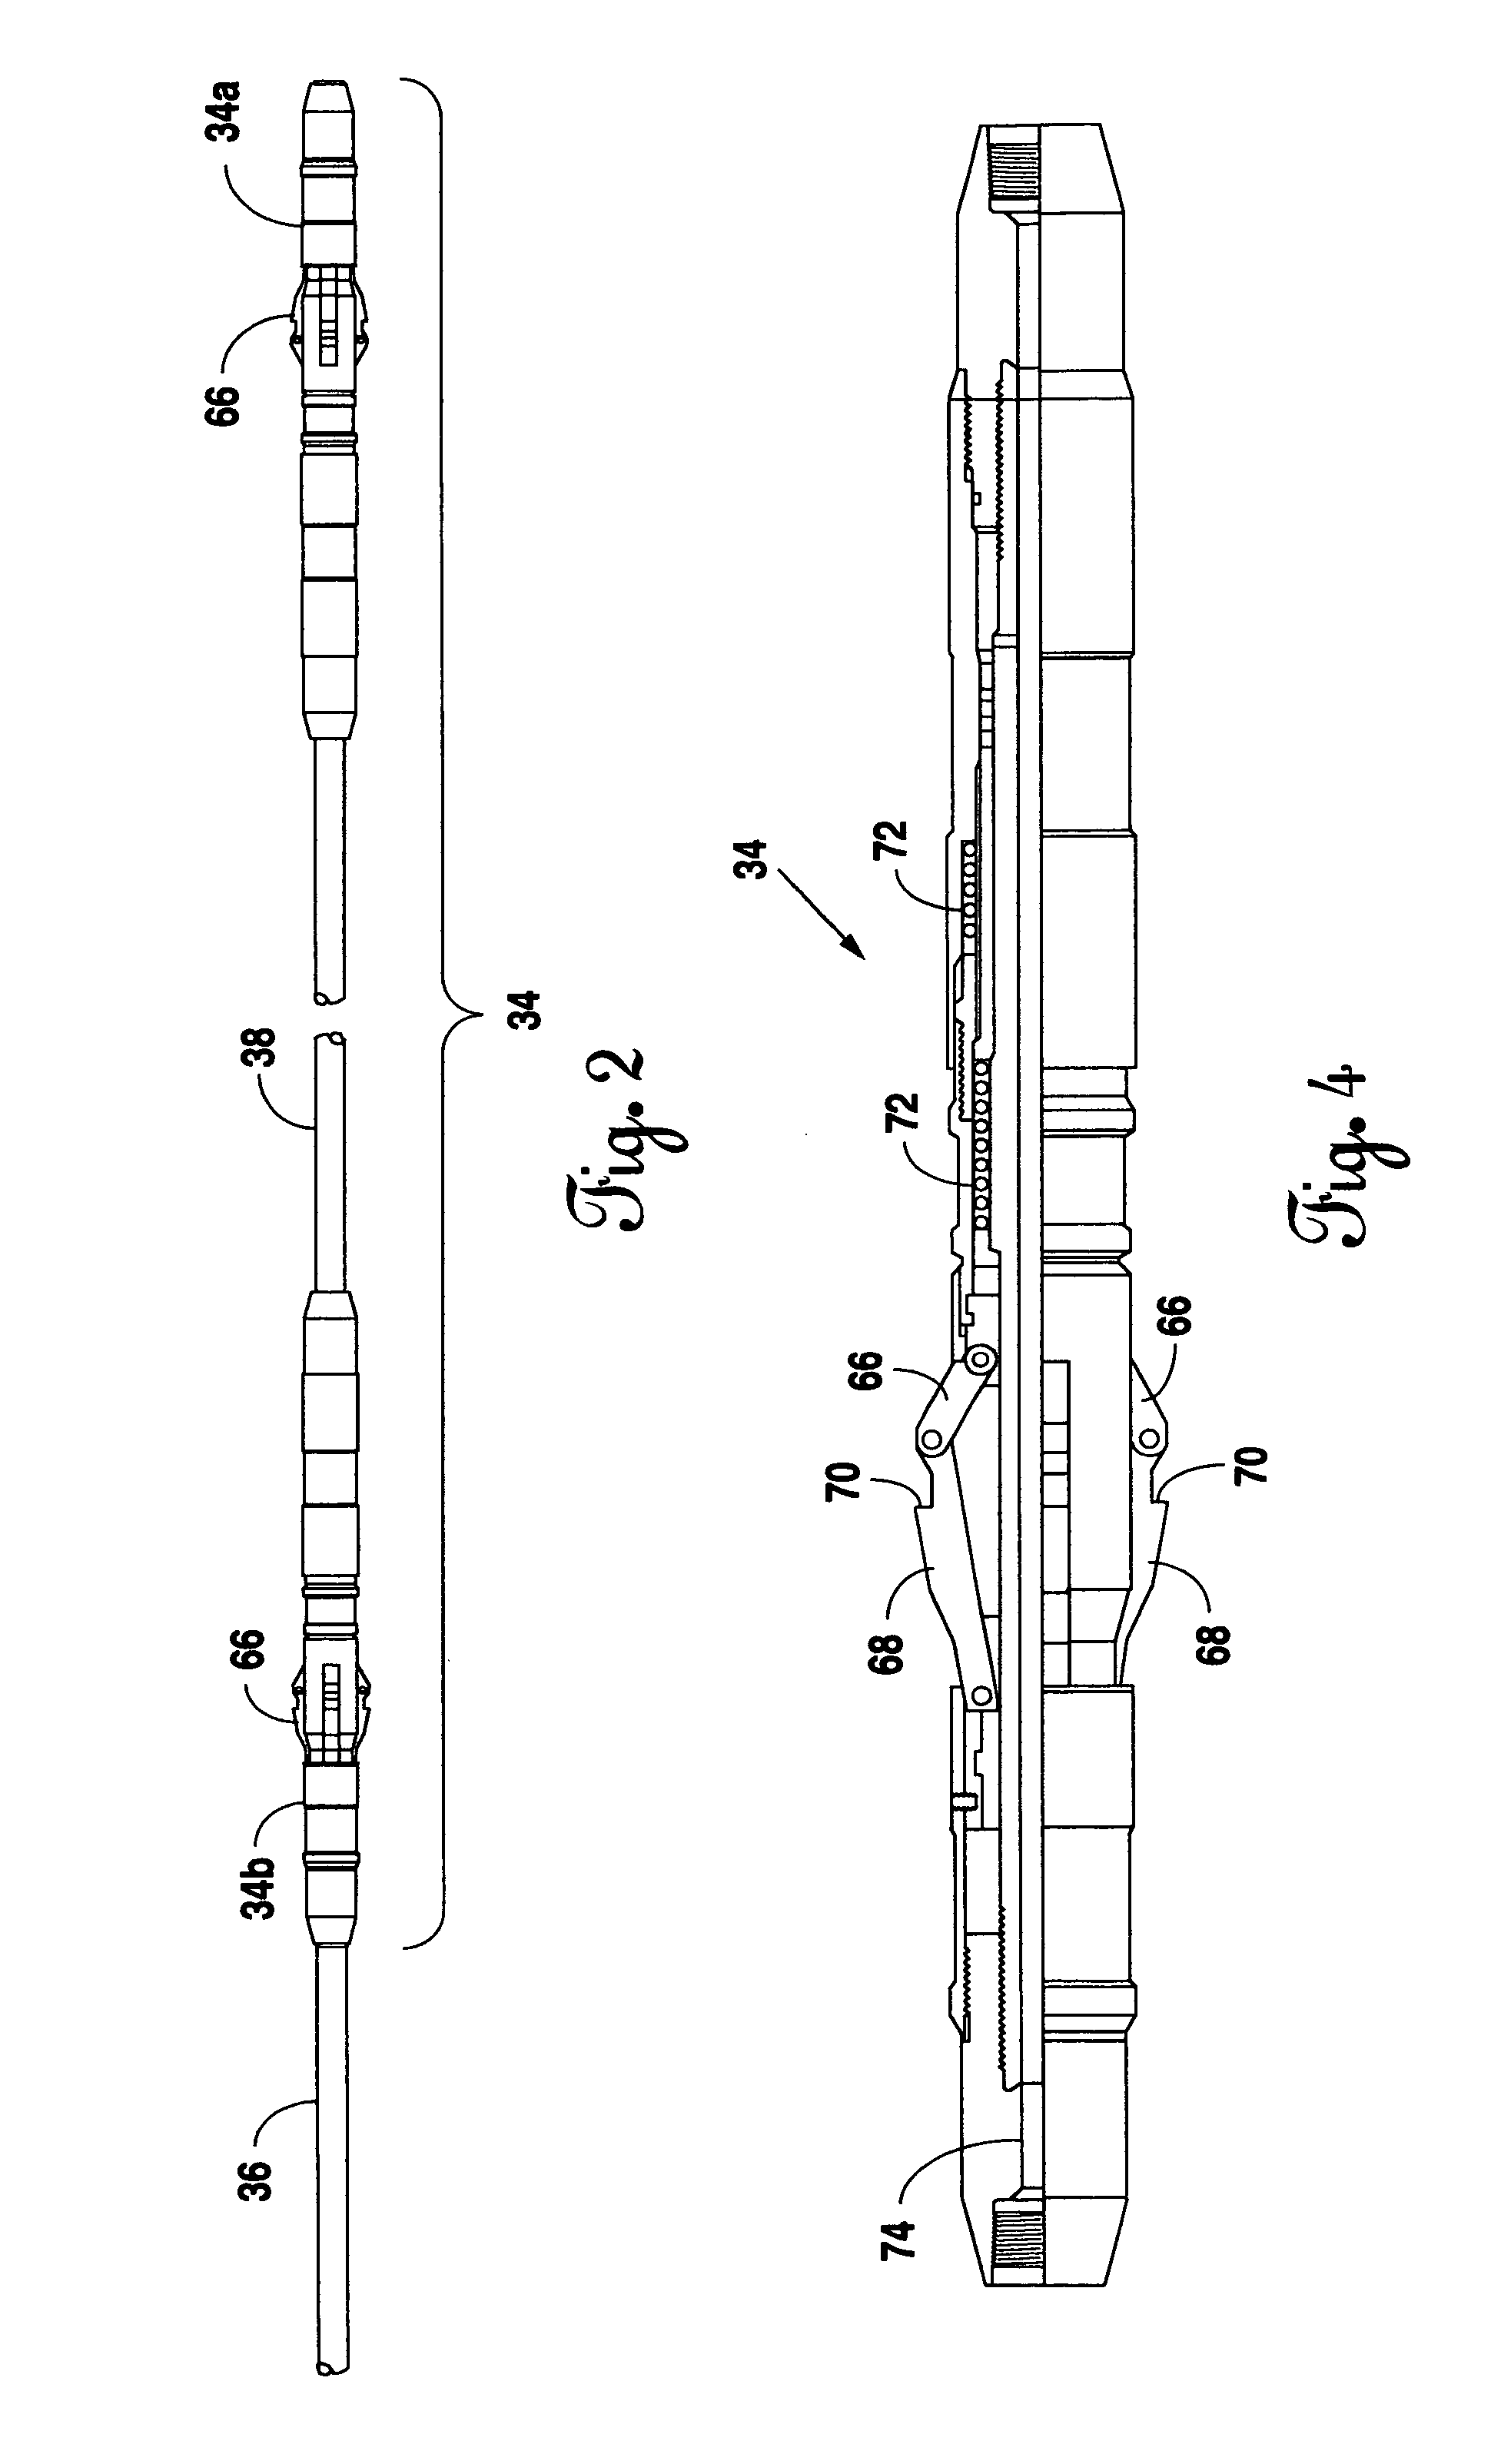 Cemented open hole selective fracing system